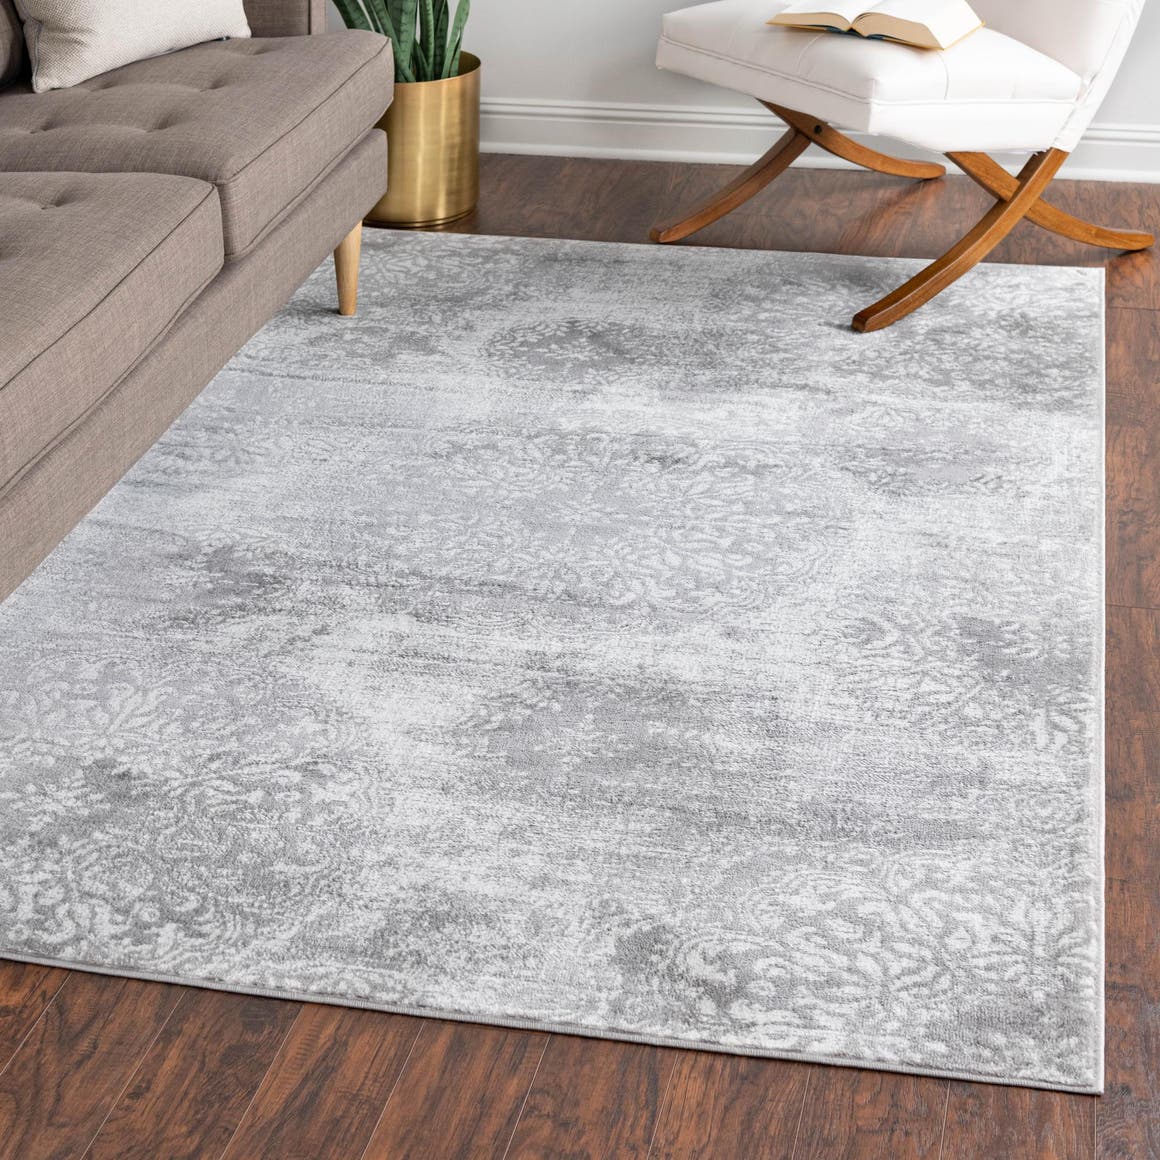 Unique Loom Grand Sofia Rug Light Gray/Ivory 6' 1 x 9' Rectangle Floral  Bohemian Perfect For Living Room Bed Room Dining Room Office 